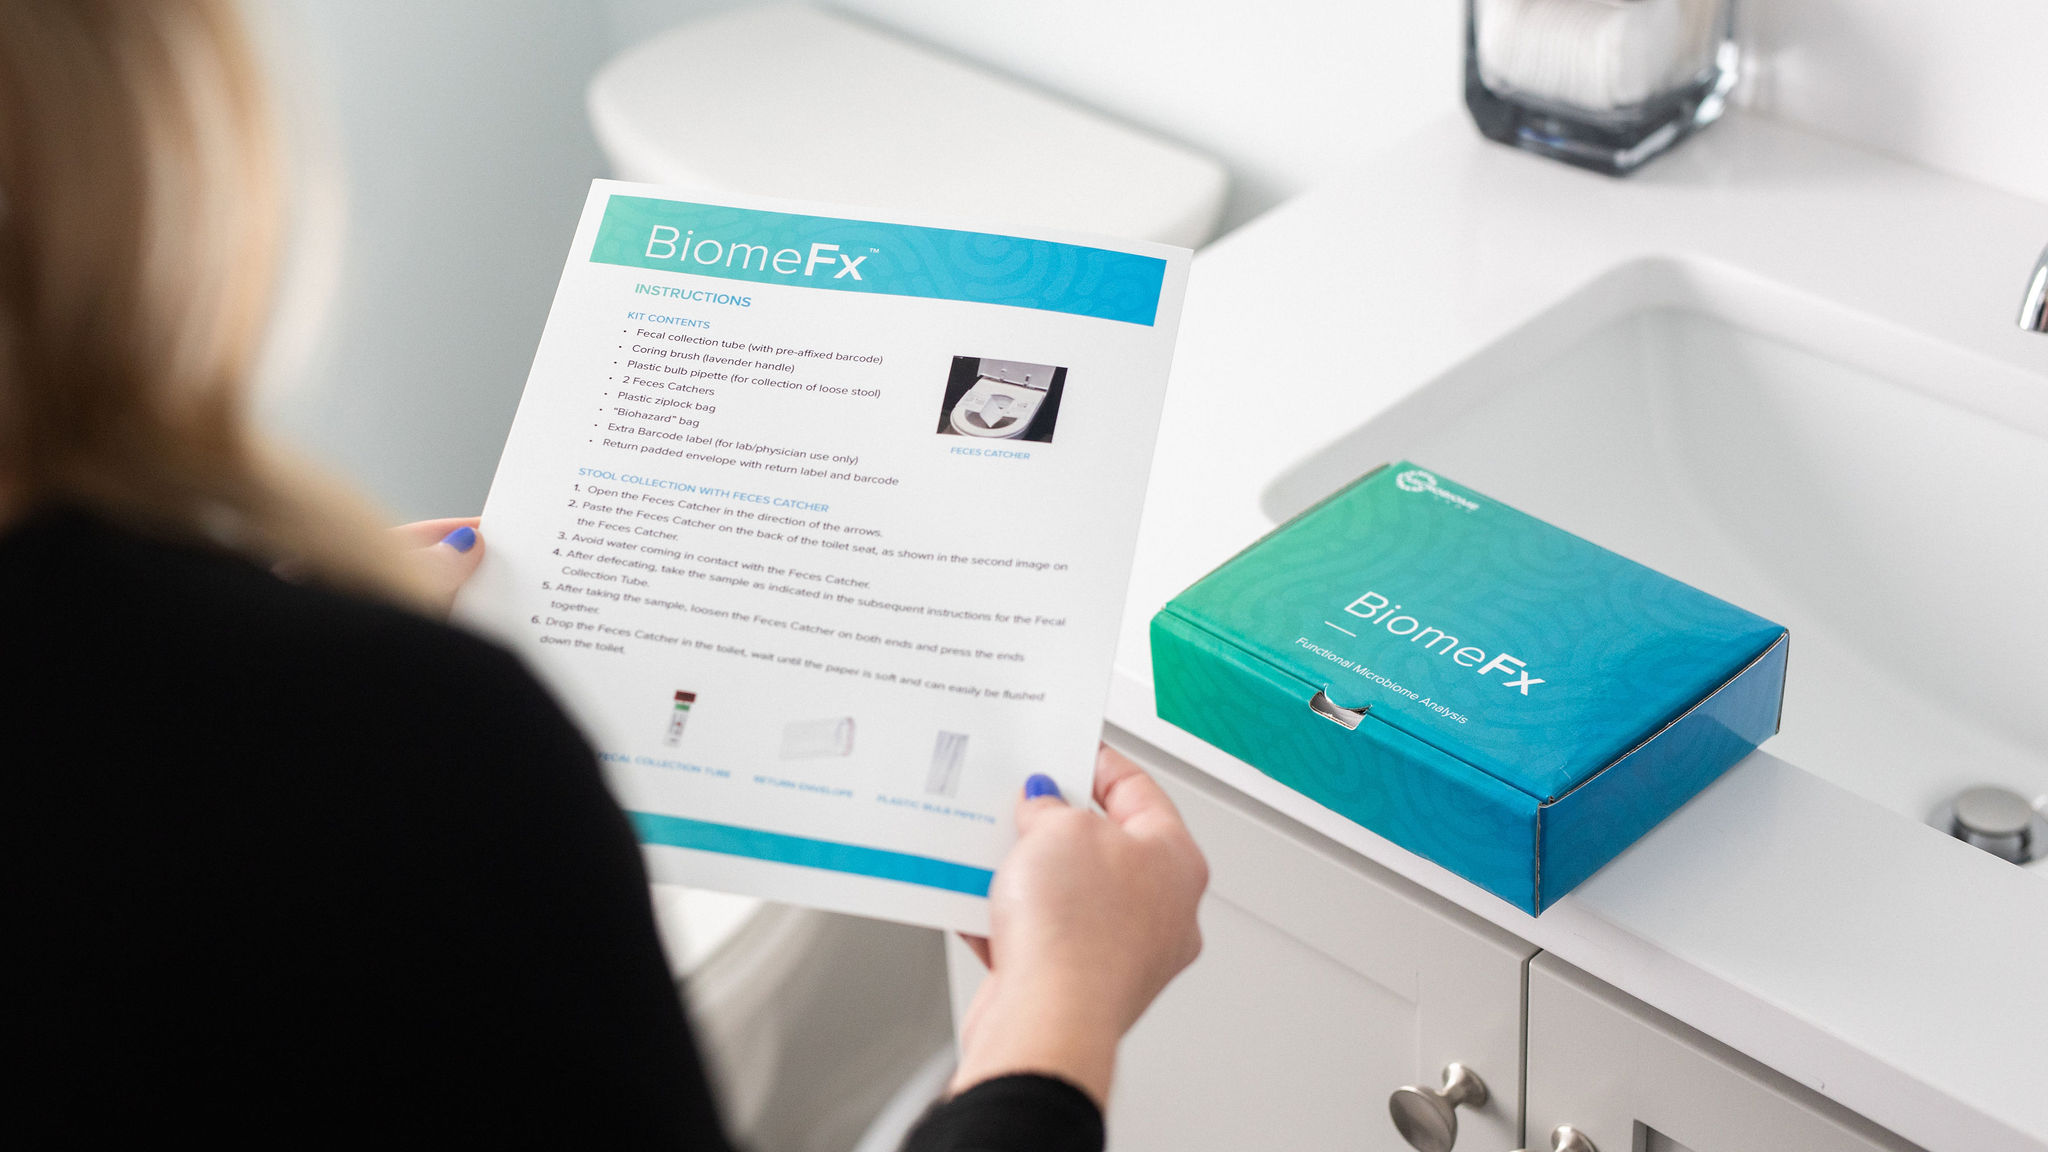 biomefx microbiome labs stool test instructions